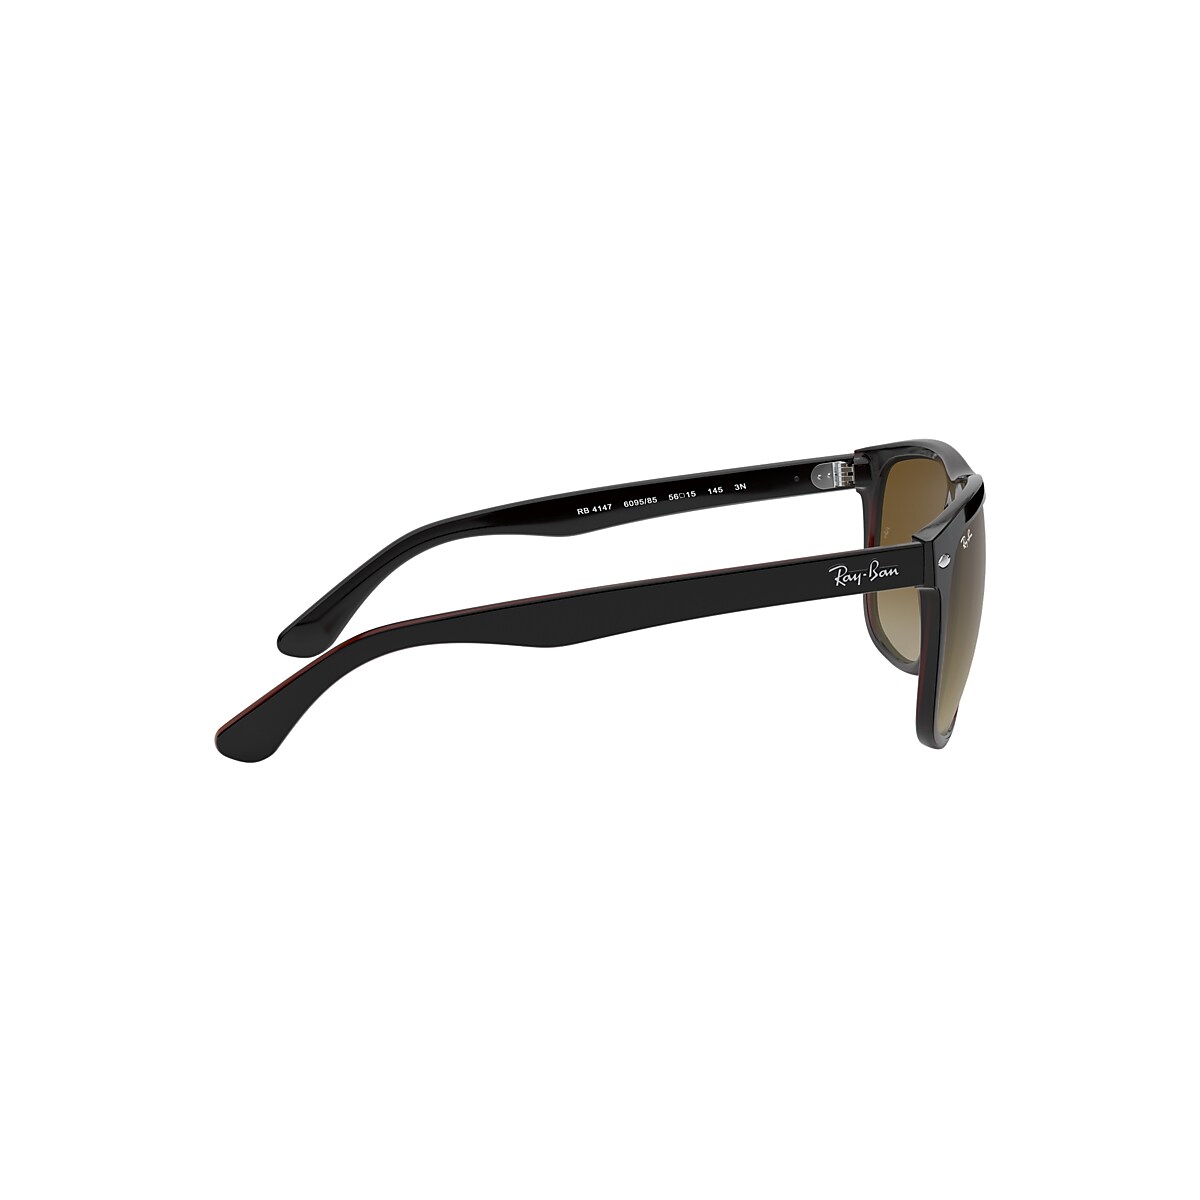 Rb4147 Sunglasses in Black and Brown | Ray-Ban®